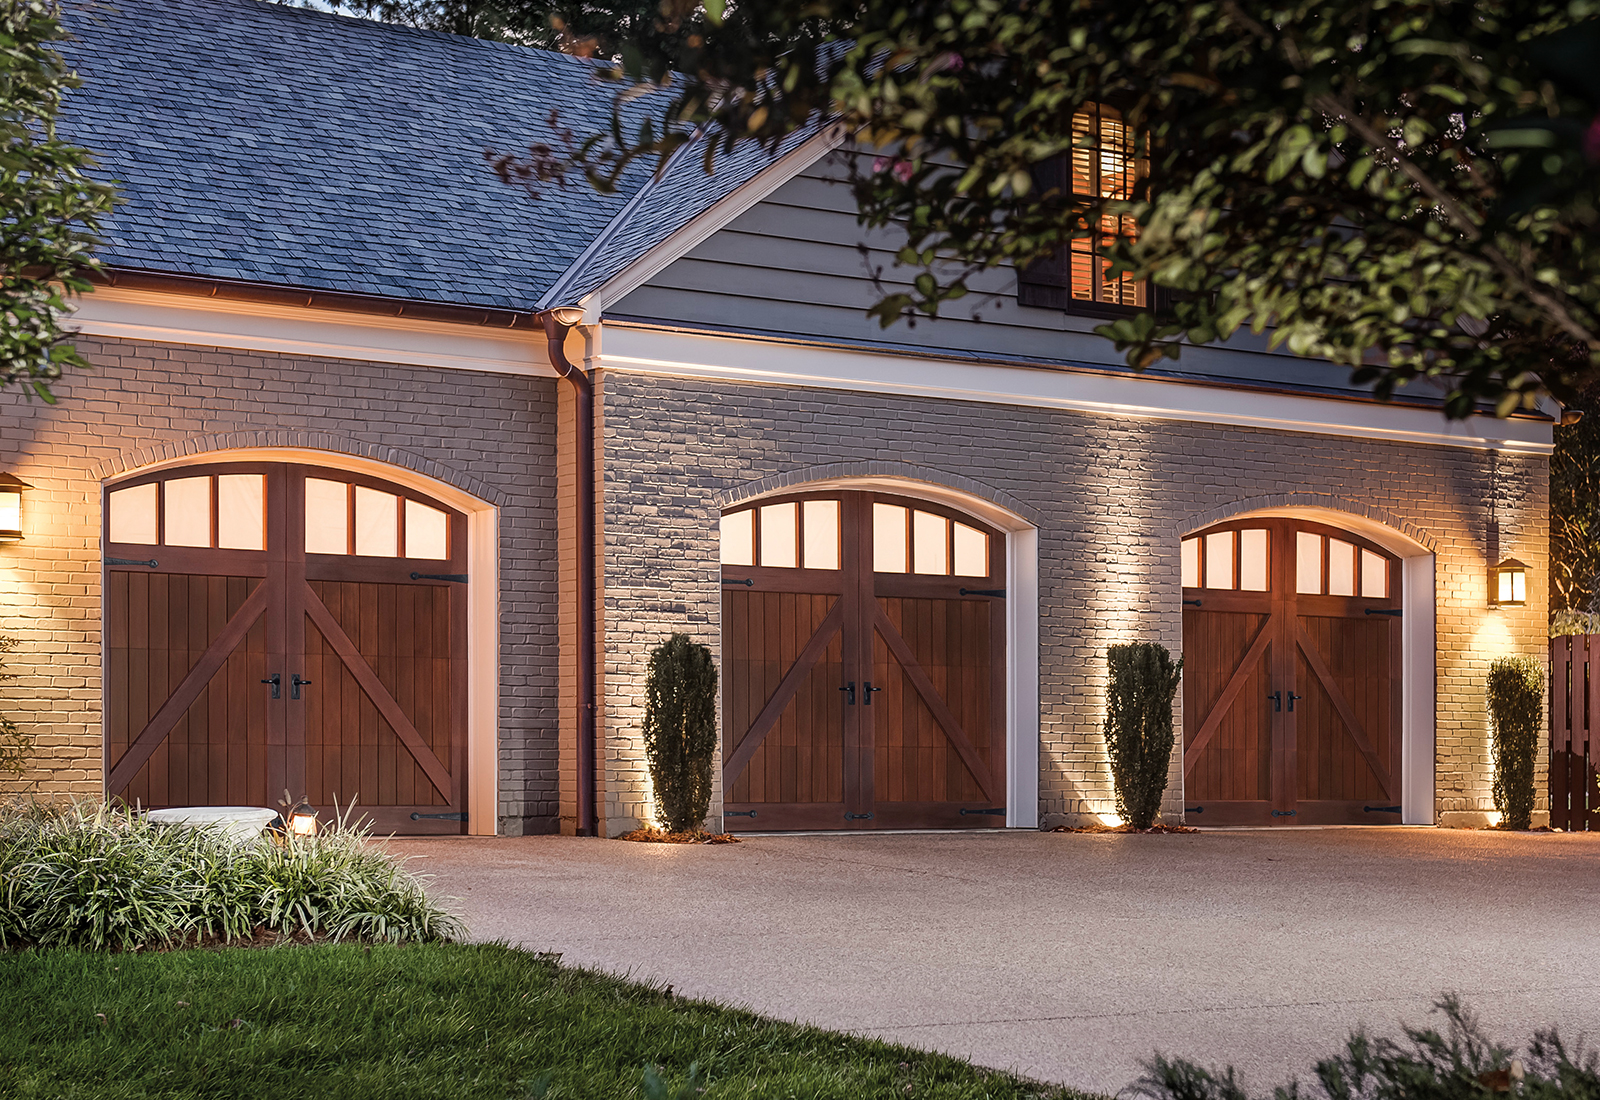 Residential garage door design by Clopay. Design is called Reserve Wood Limited Edition.